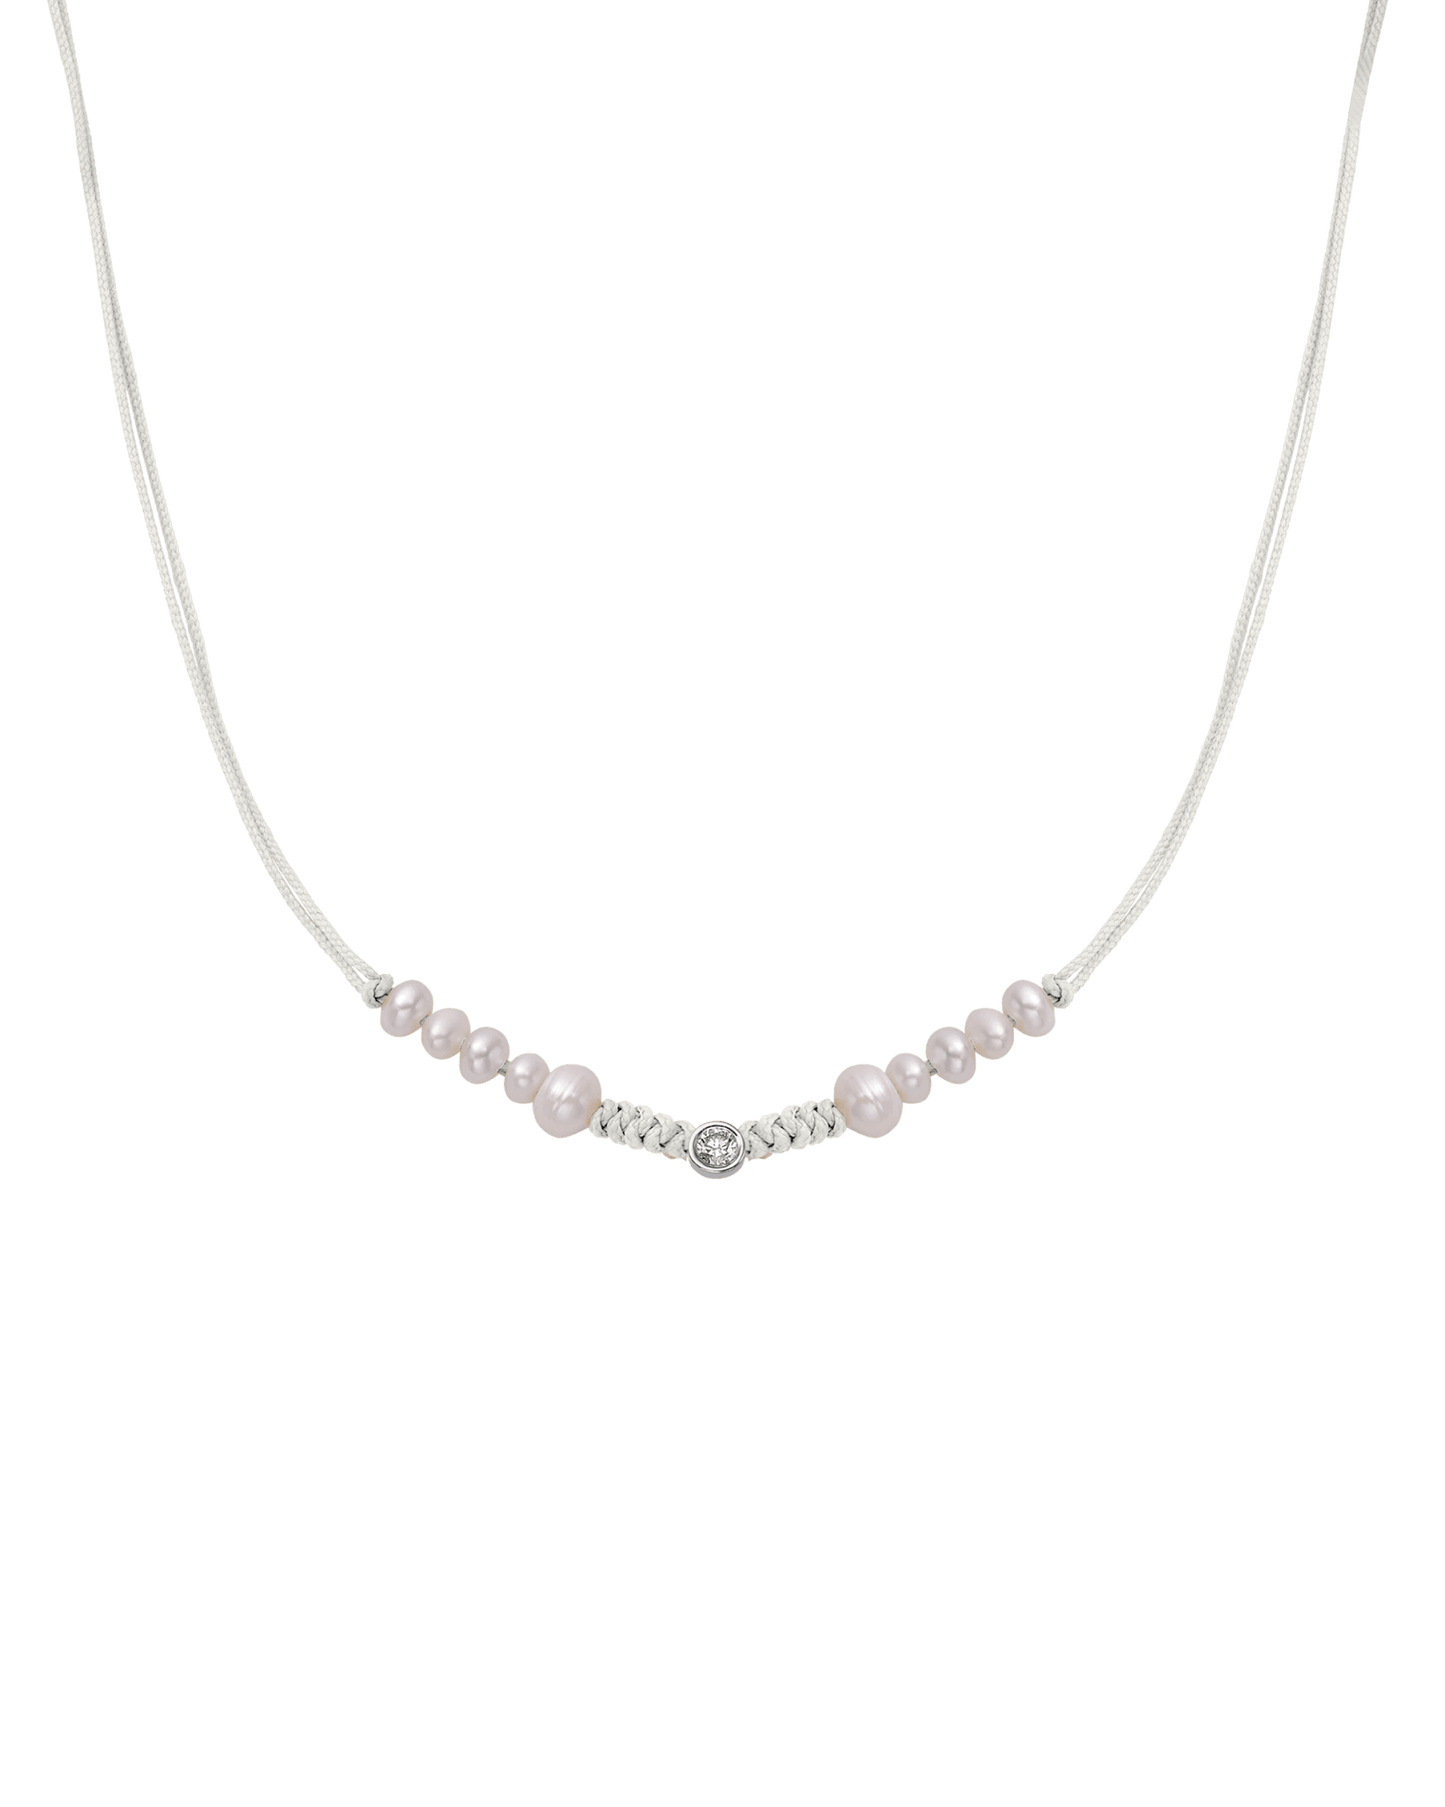 Ten Natural Pearl String of Love Necklace - 14K White Gold Necklaces 14K Solid Gold Pearl Large: 0.1ct 